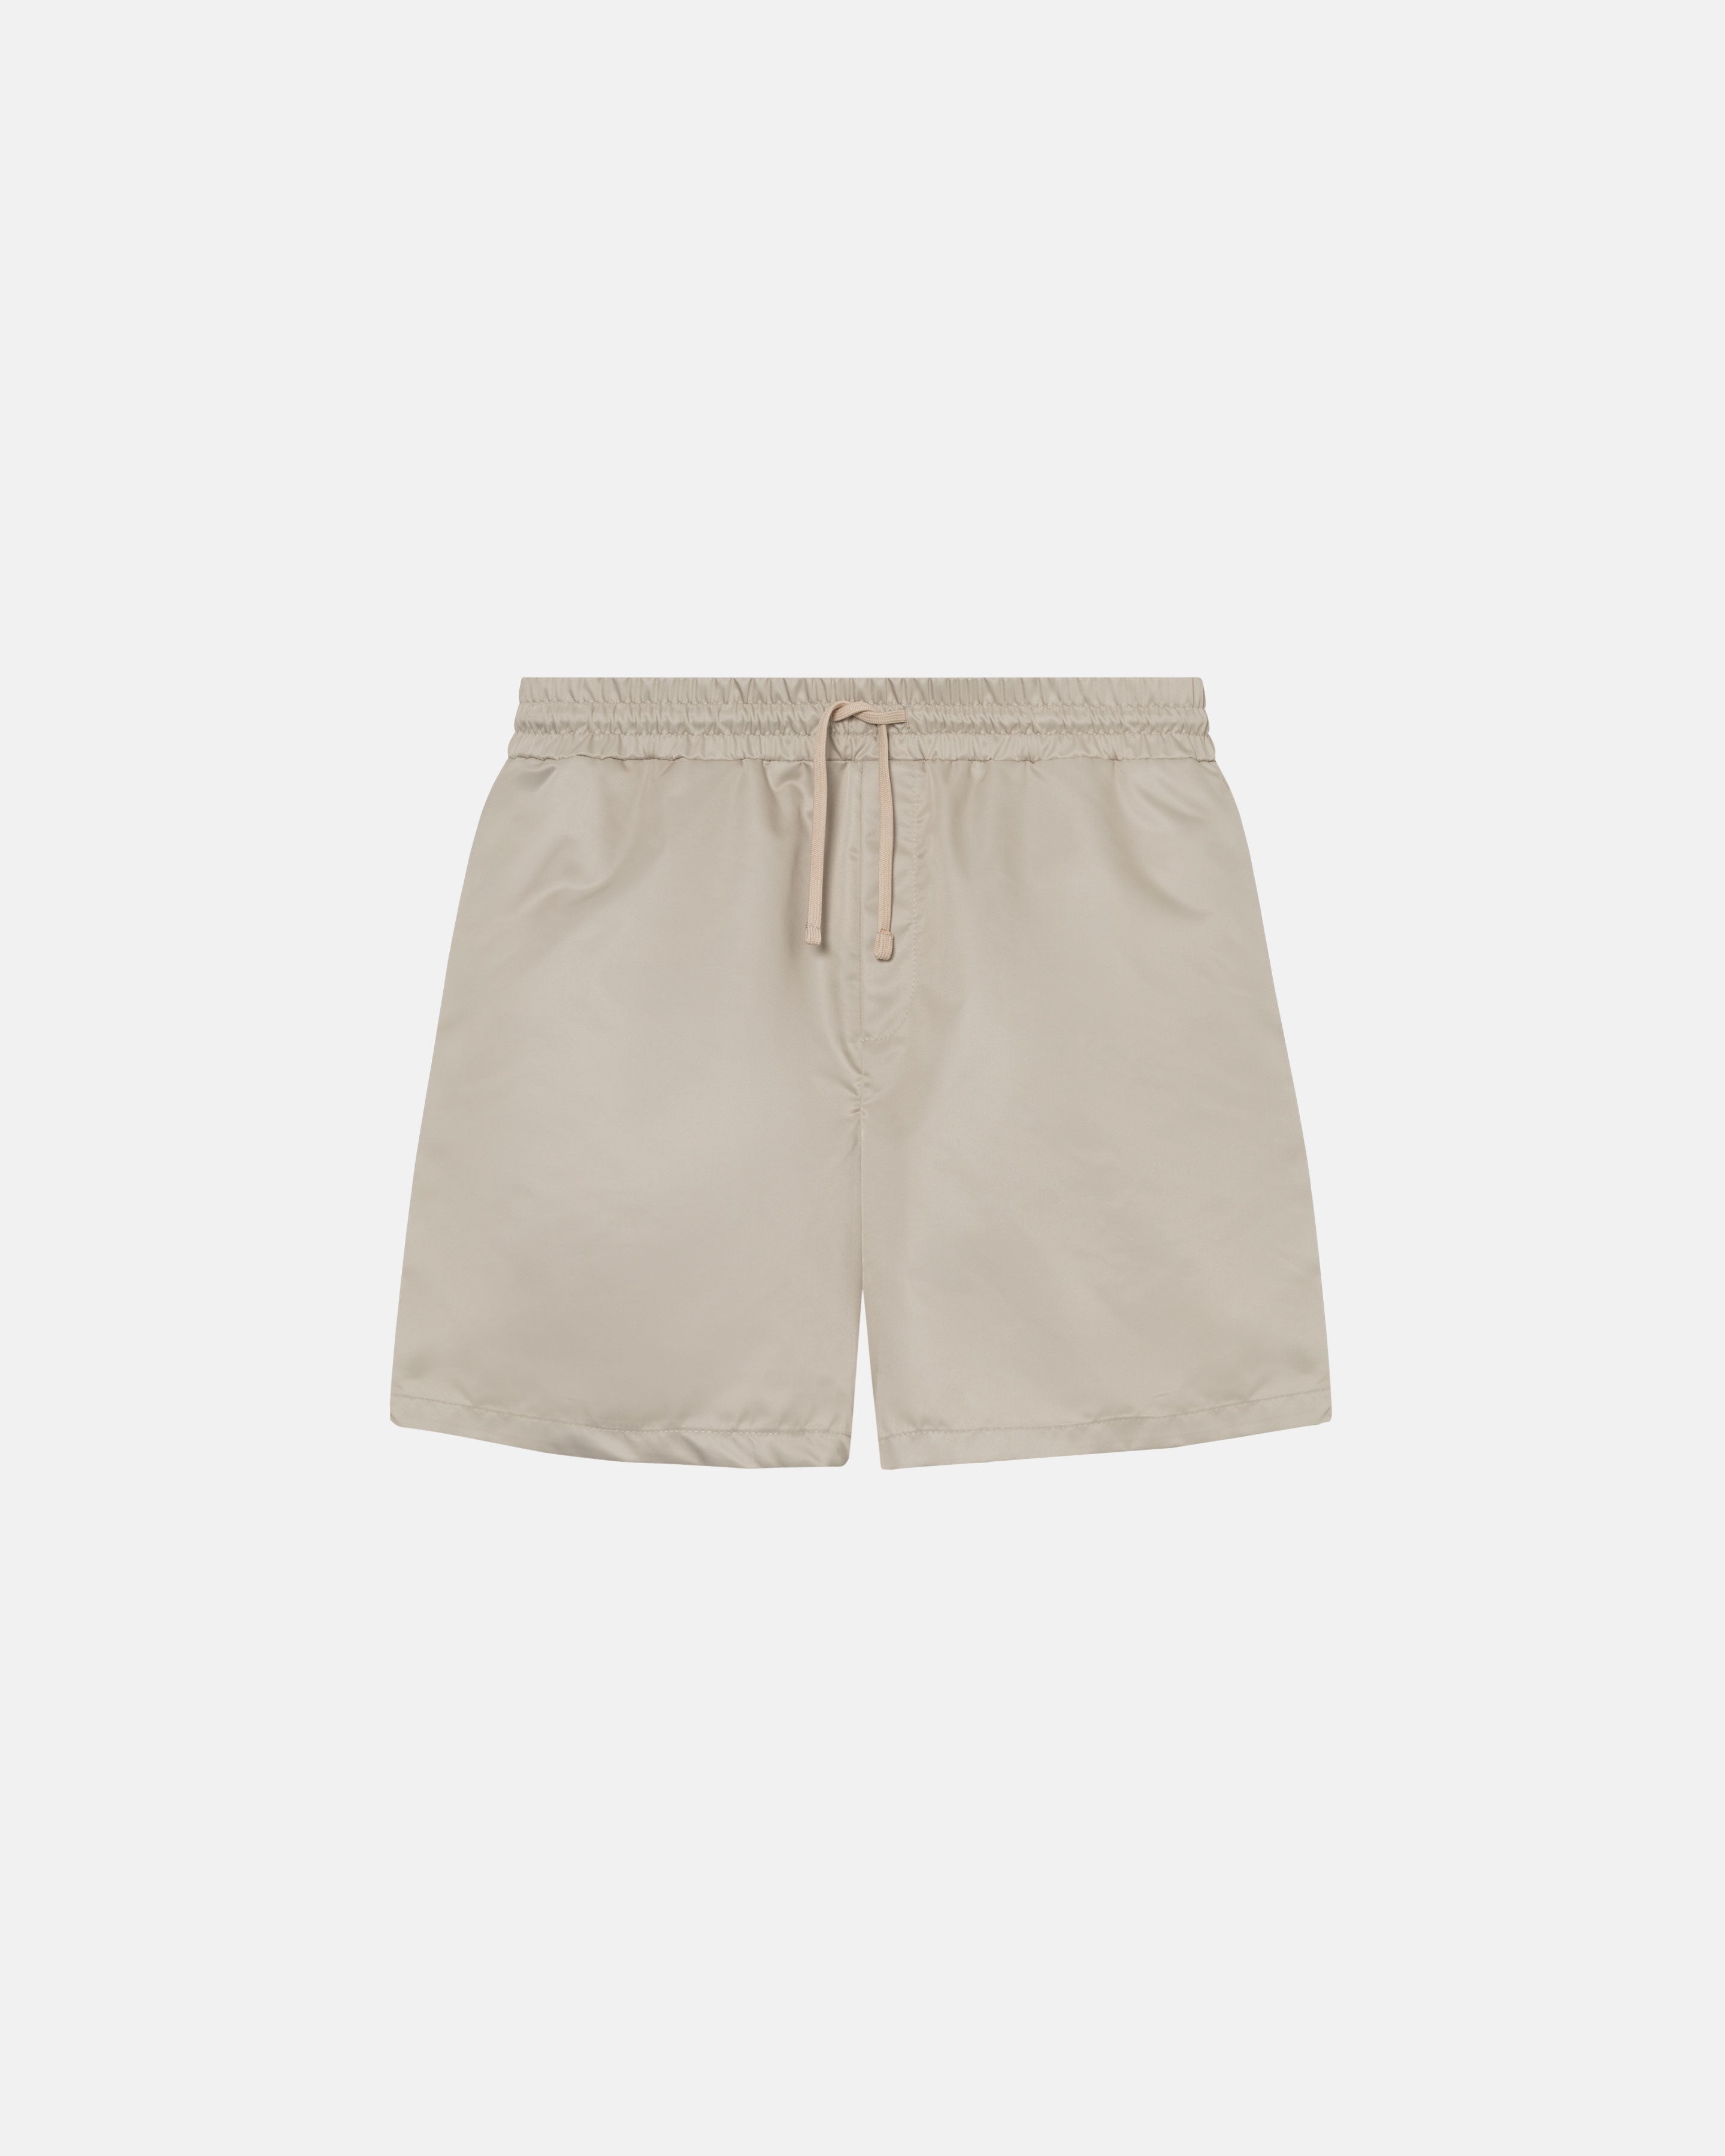 Beige polyester shorts with drawstrings